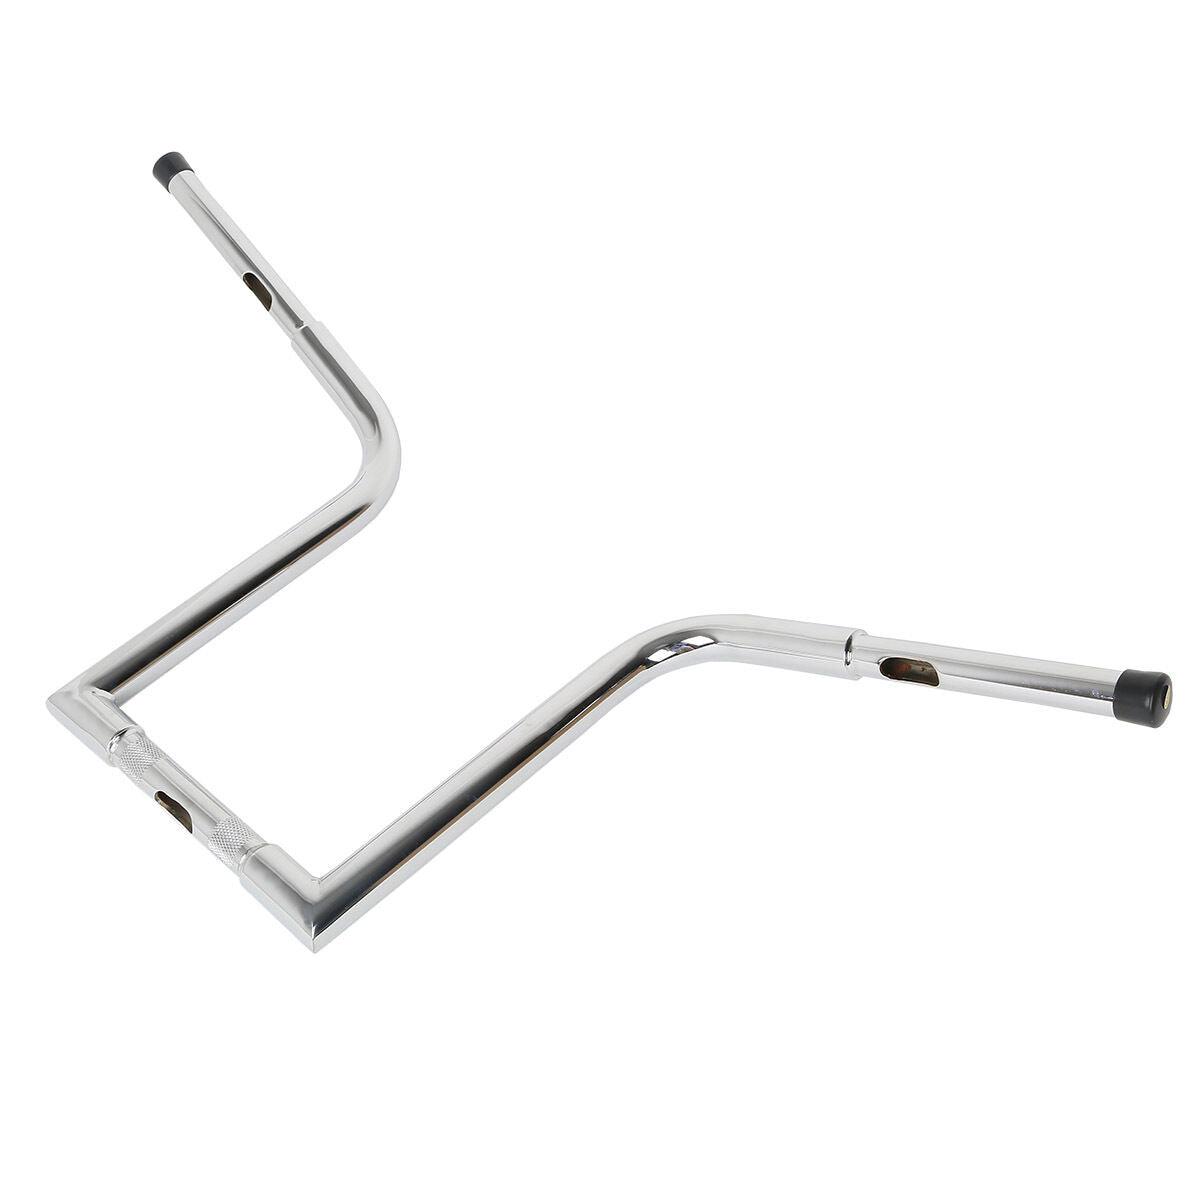 Chrome Ape Hangers Bars Fat 1-1/4" 14" Rise Handlebar Fit For Harley FLST FXST - Moto Life Products